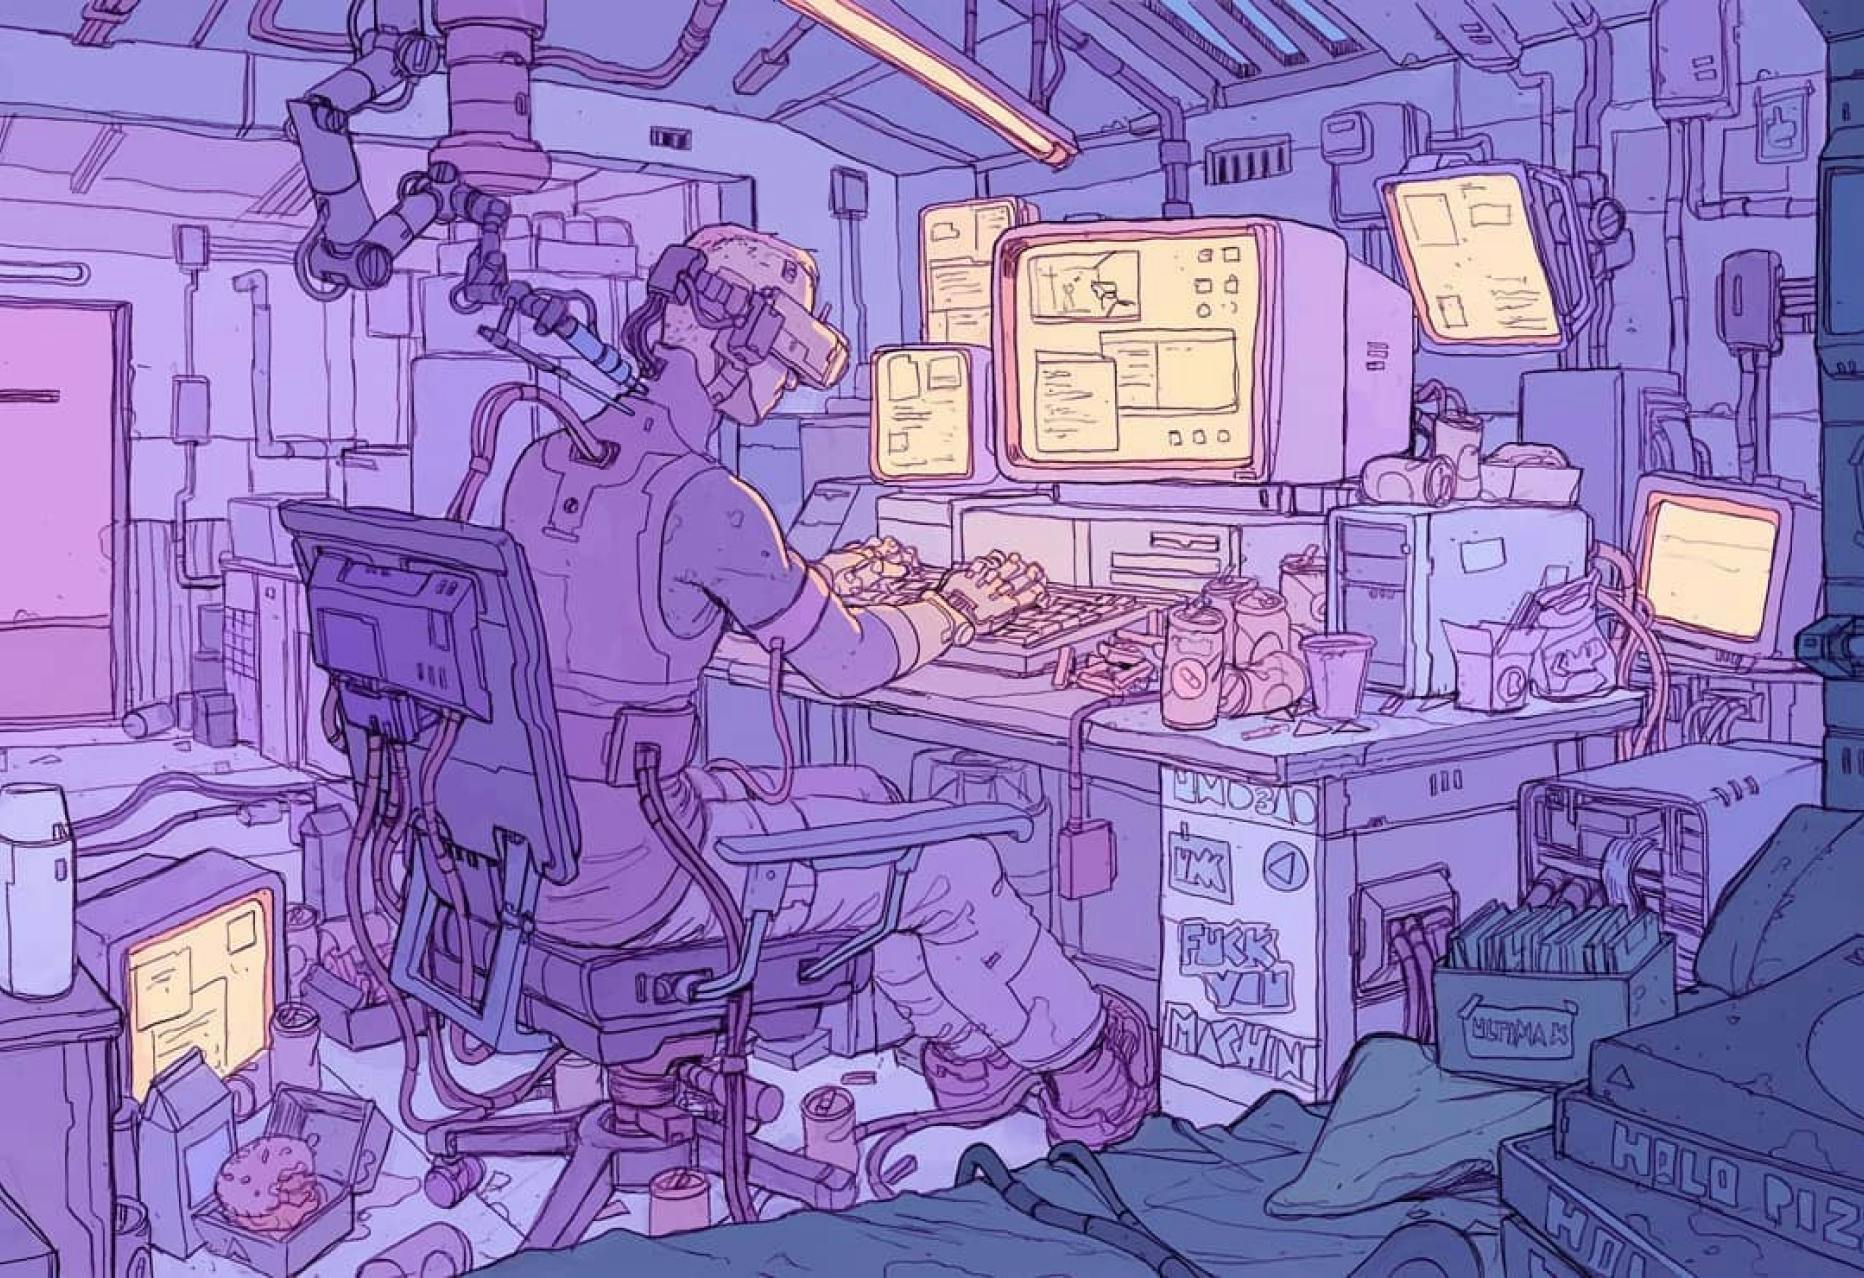 person working on computer in a dystopian setting